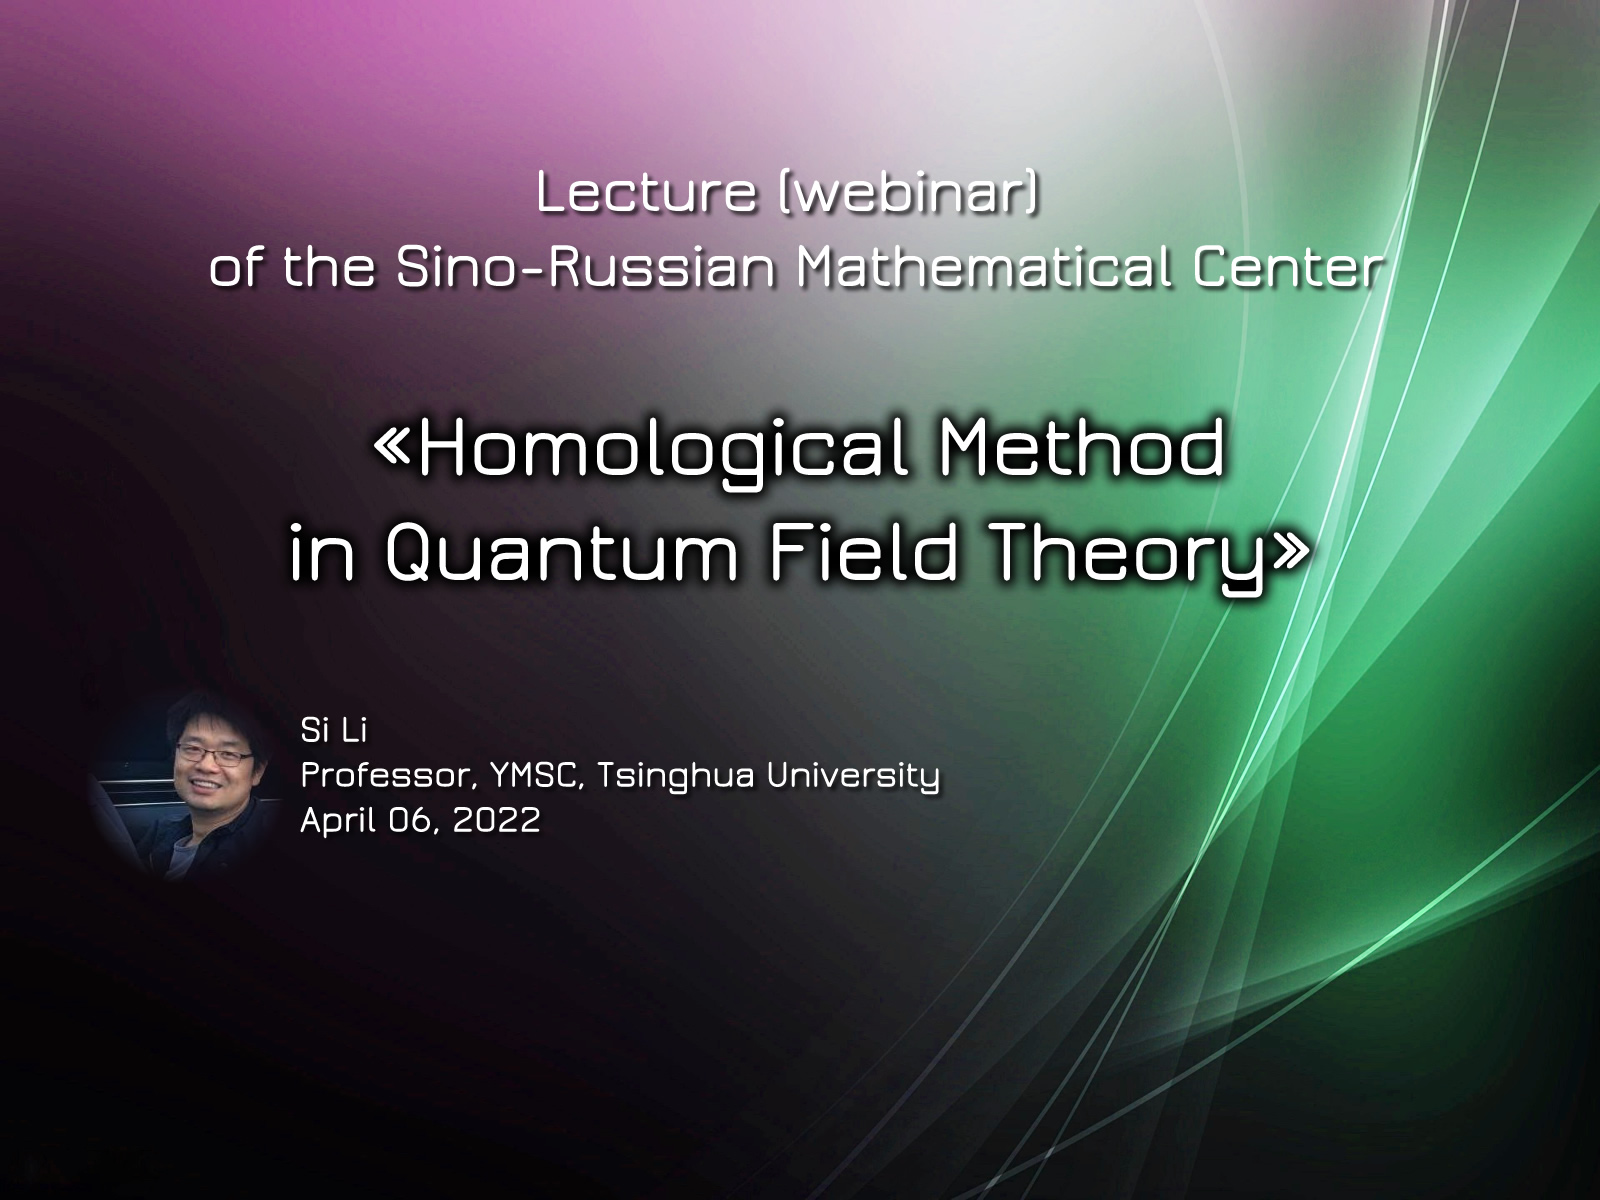 «Homological Method in Quantum Field Theory» 06.04.2022